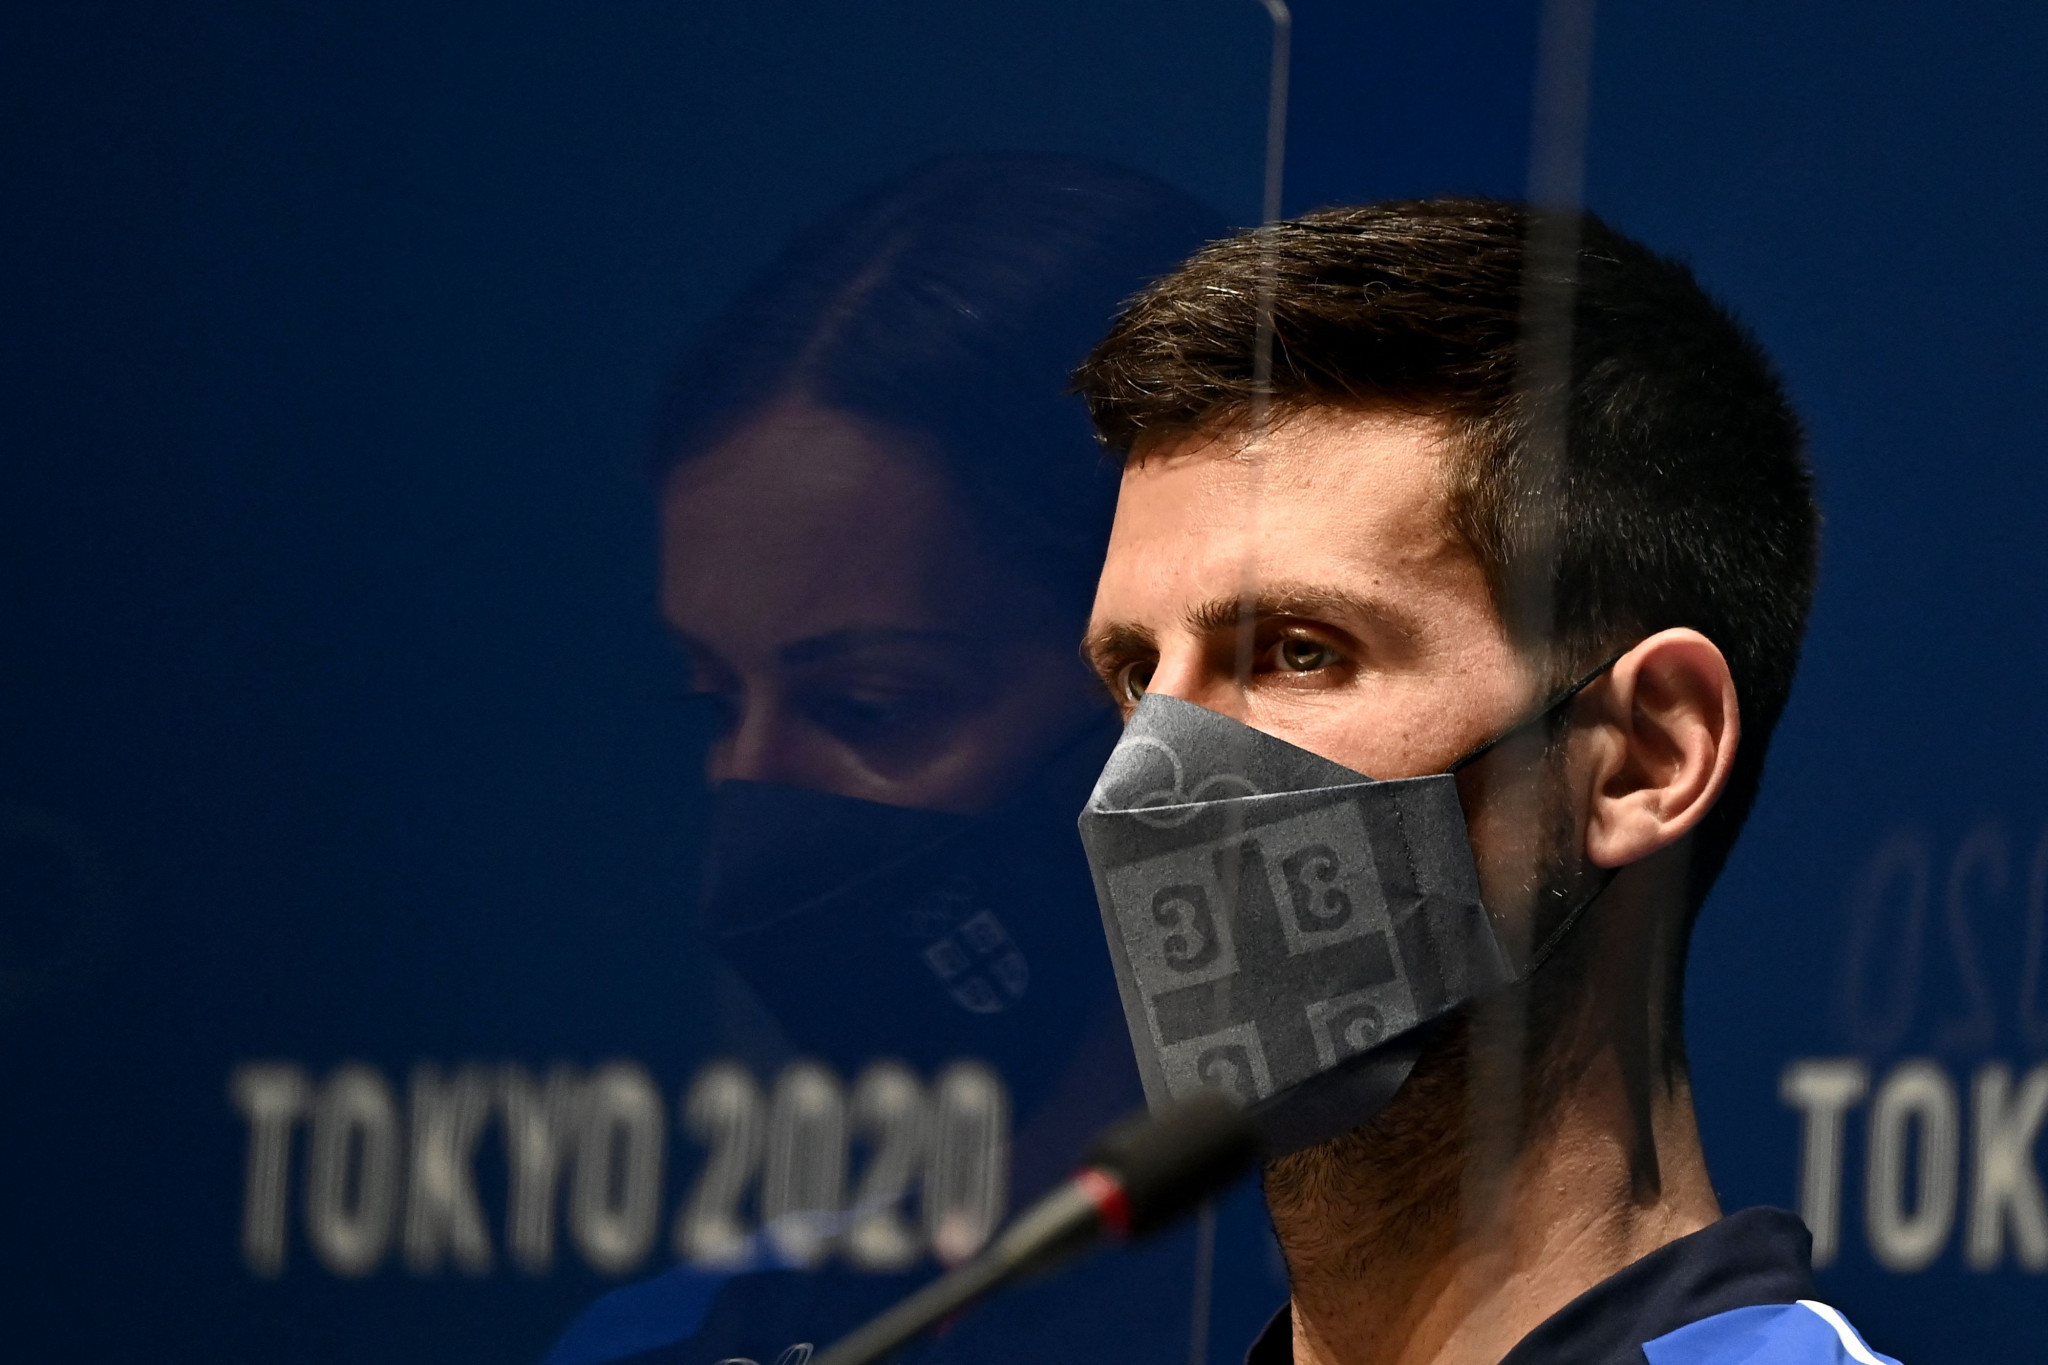 Tennis star Novak Djokovic was the main draw at a Serbian press conference ©Getty Images